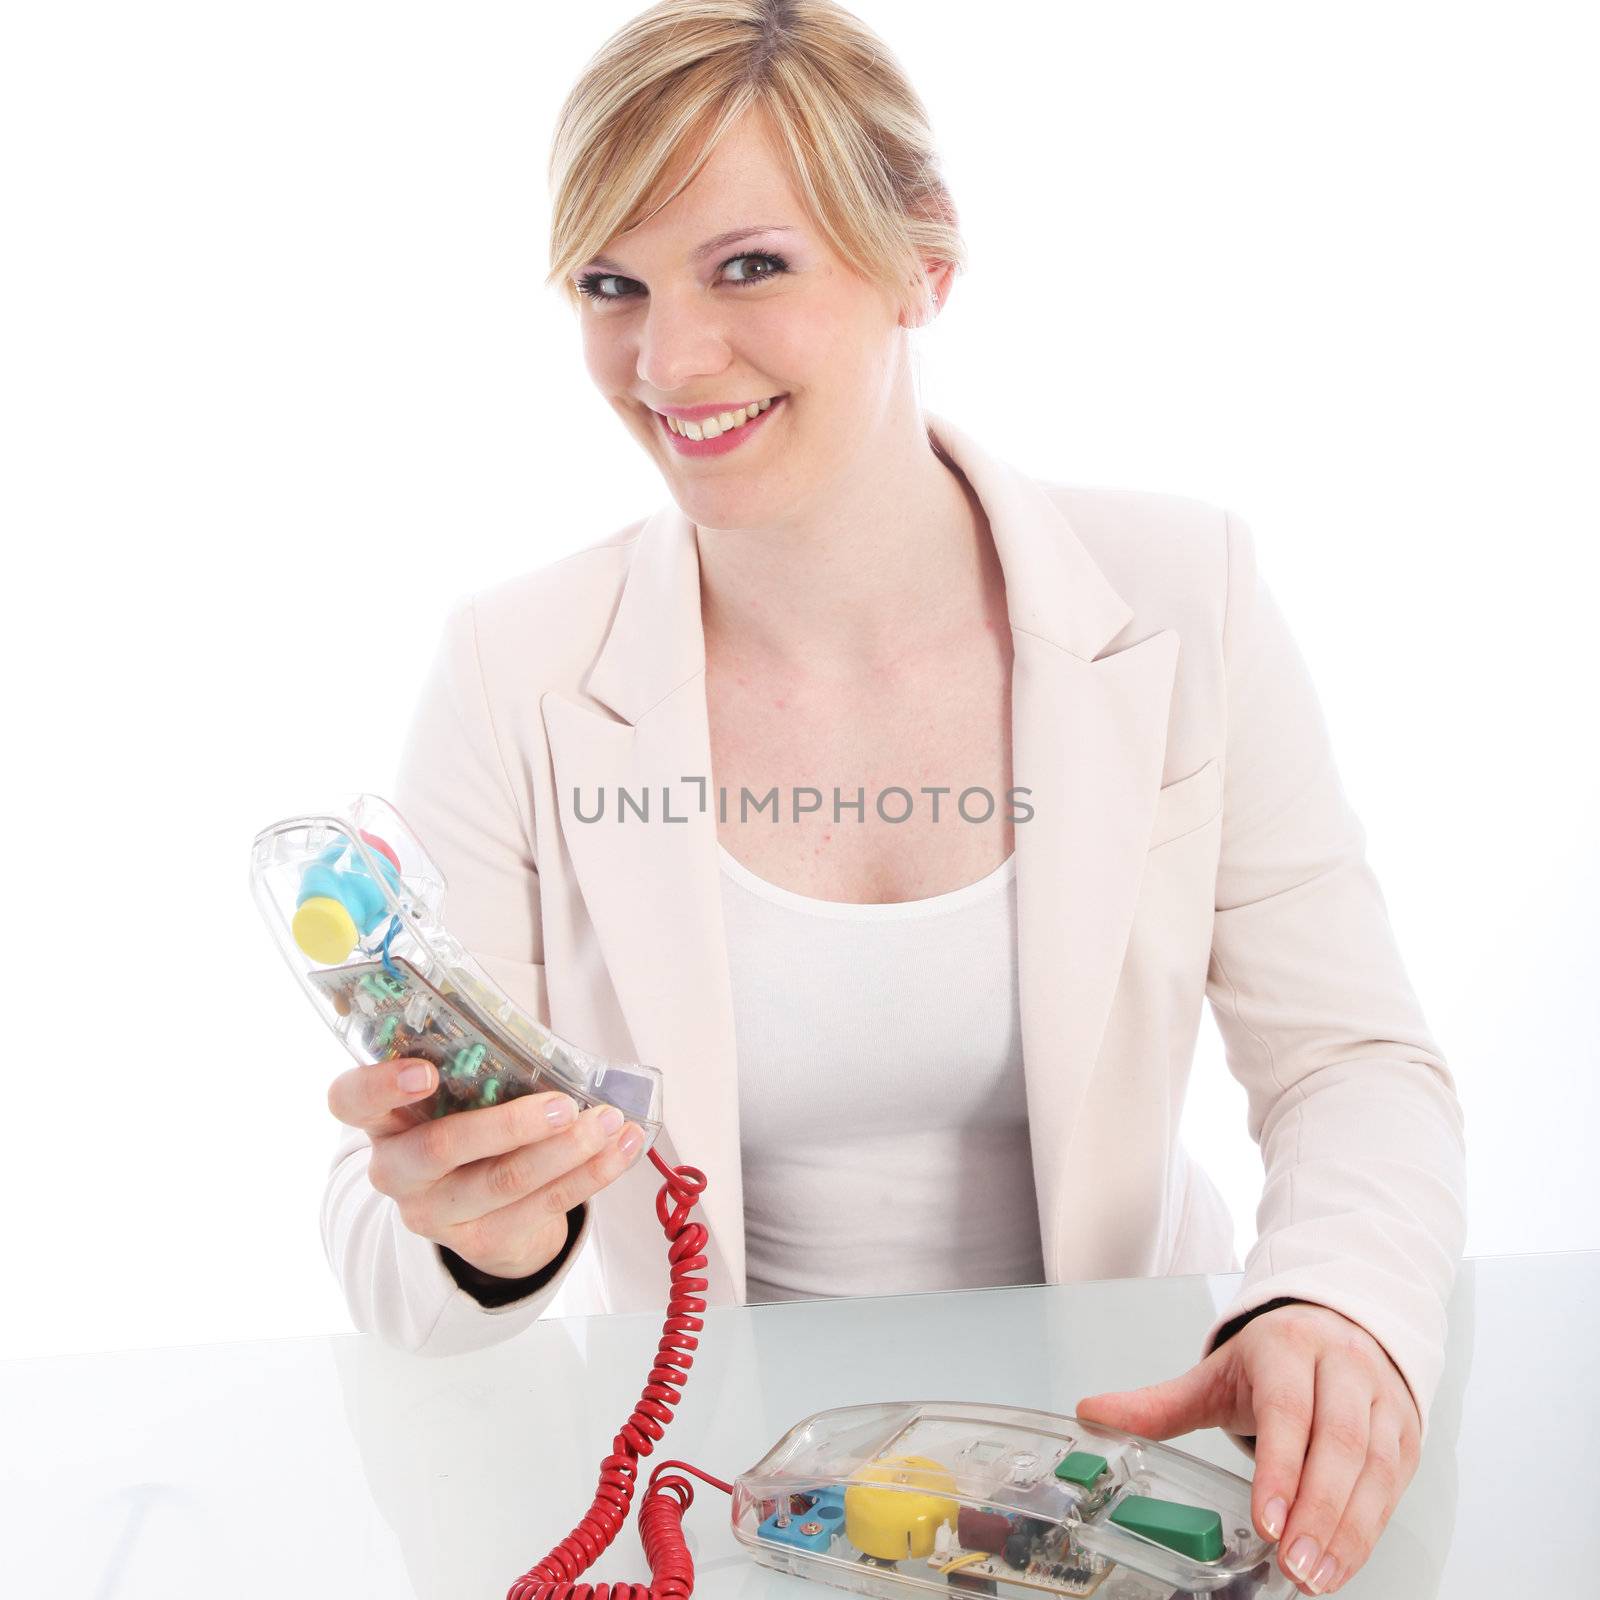 Smiling woman using a landline telephone by Farina6000